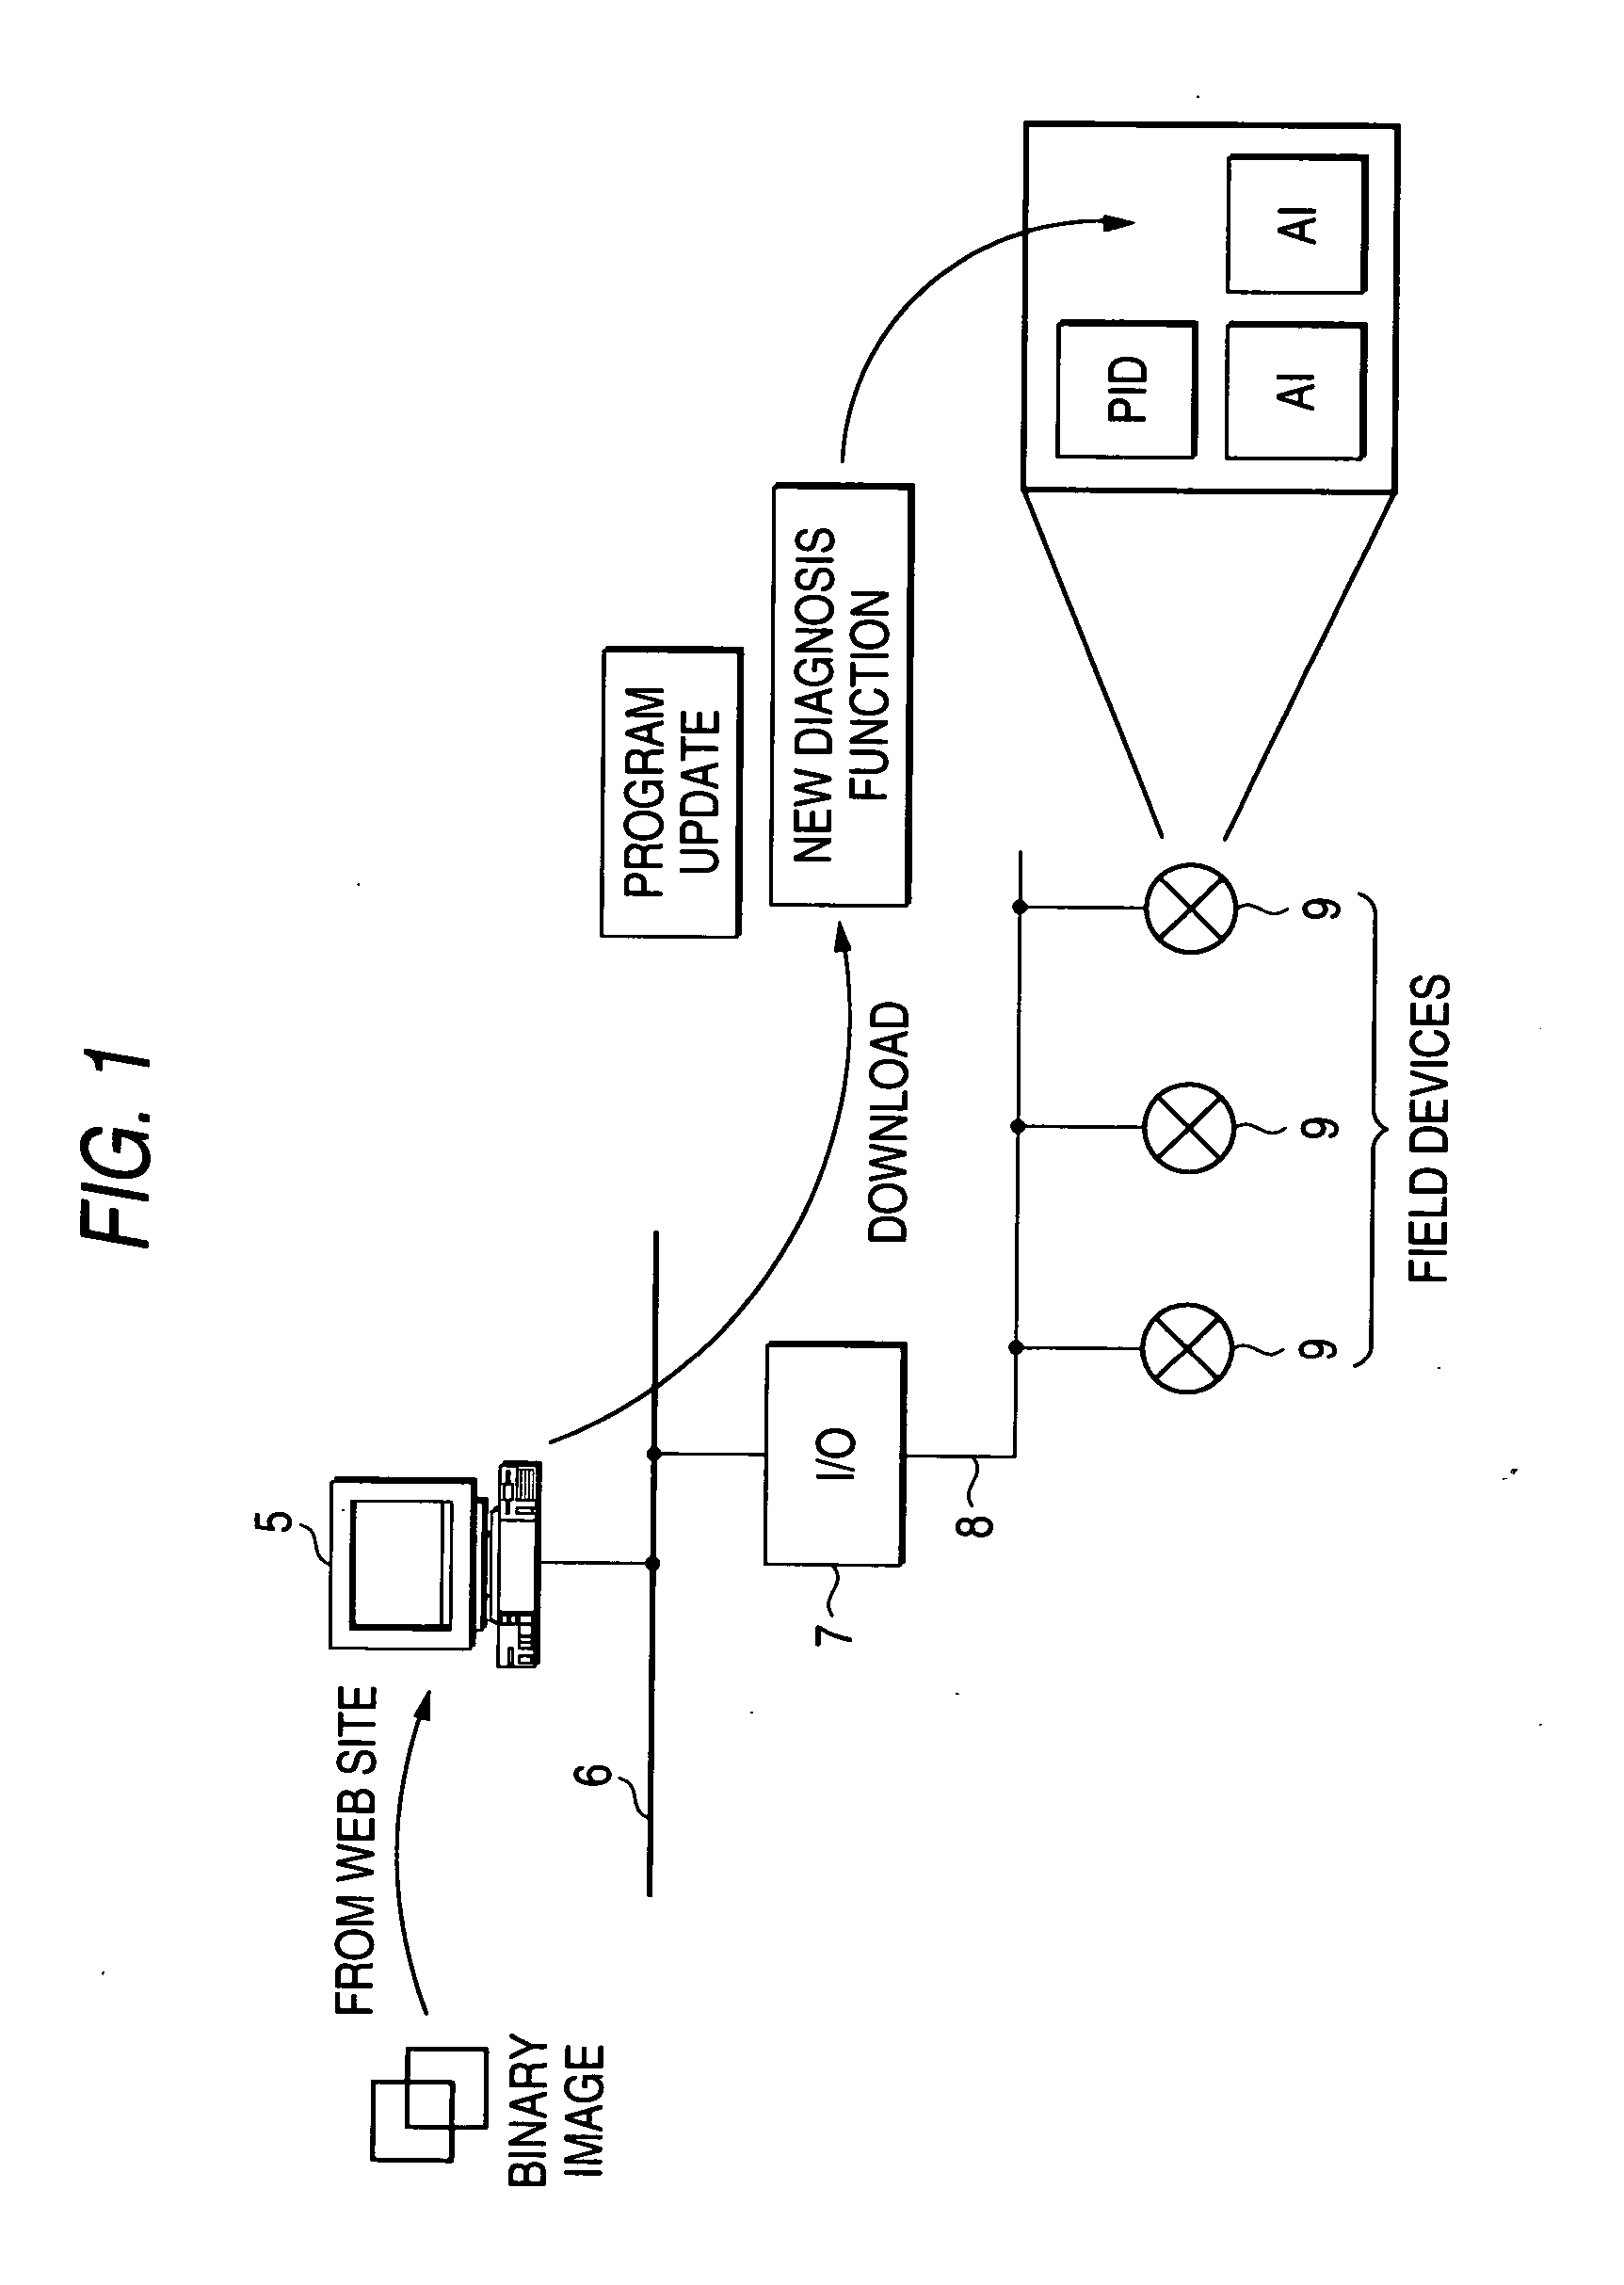 Memory updating system for field device